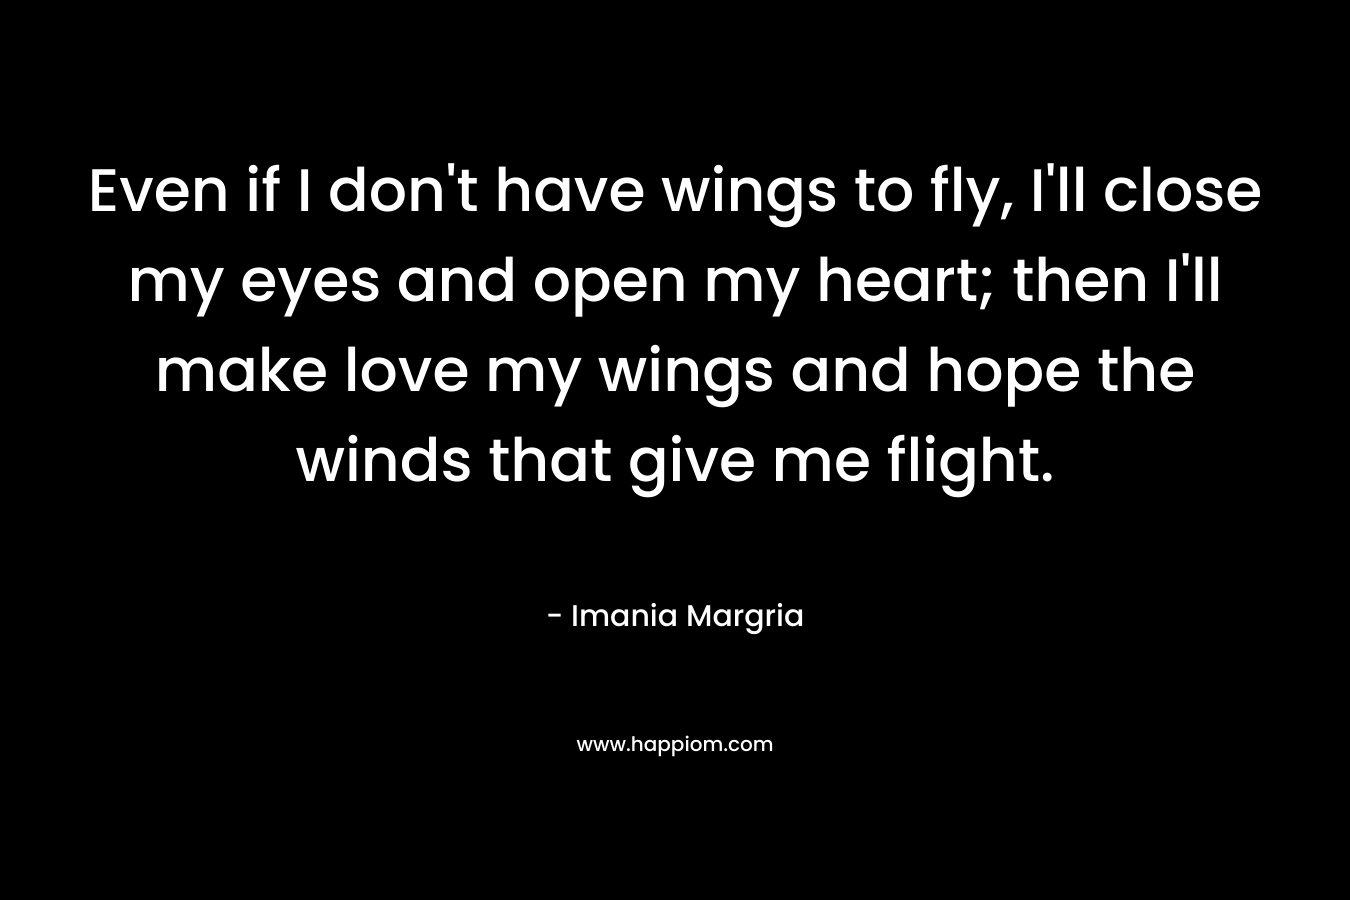 Even if I don't have wings to fly, I'll close my eyes and open my heart; then I'll make love my wings and hope the winds that give me flight.